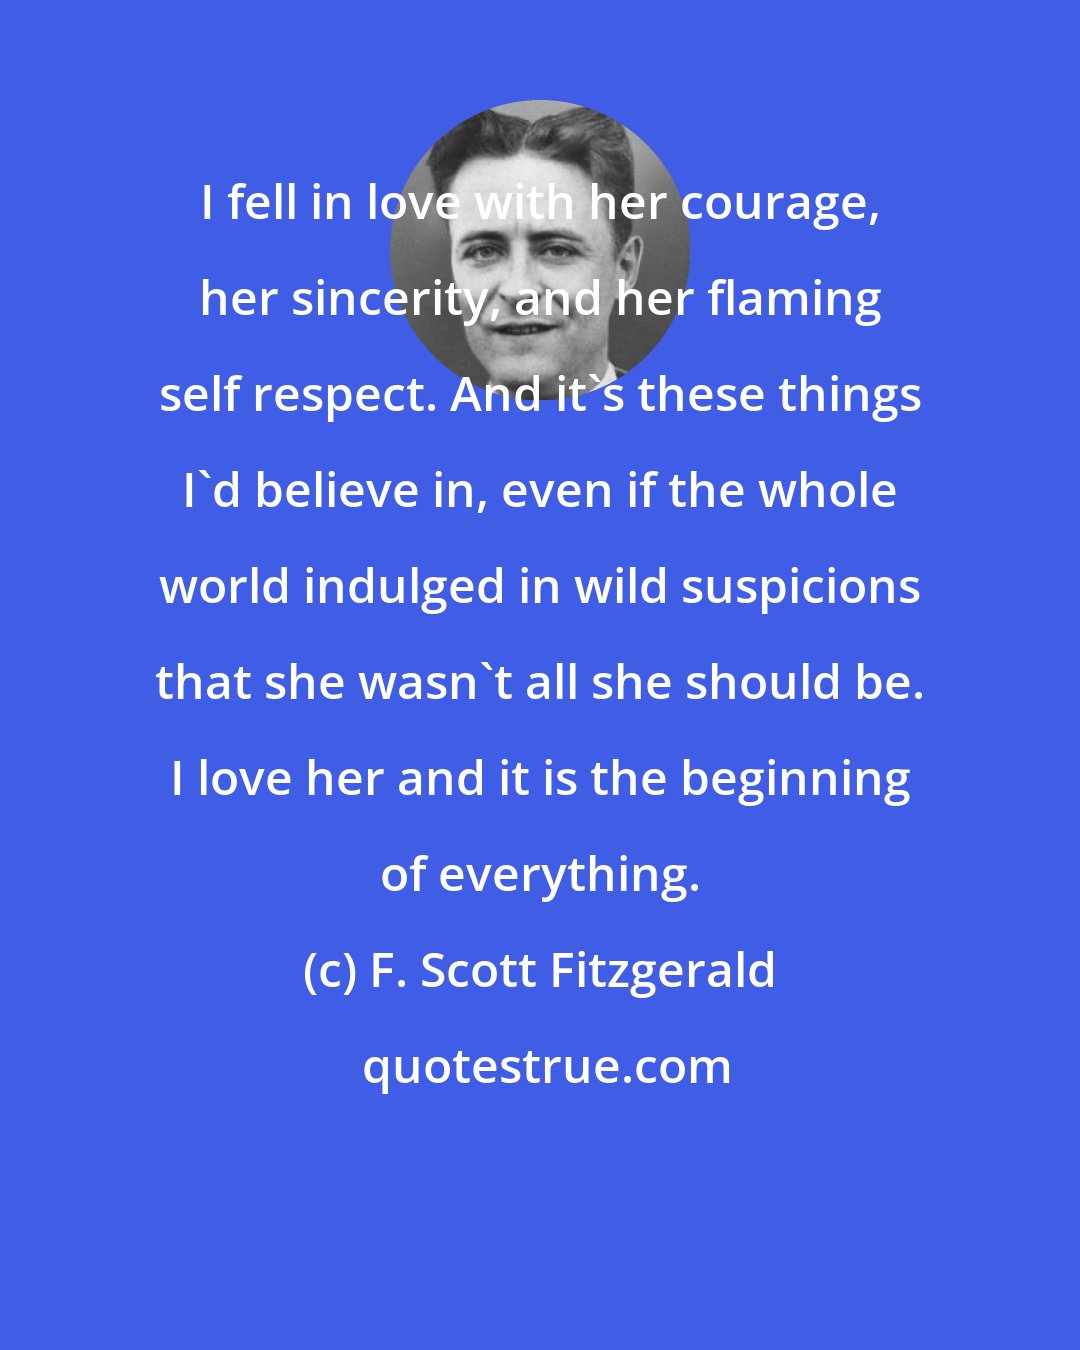 F. Scott Fitzgerald: I fell in love with her courage, her sincerity, and her flaming self respect. And it's these things I'd believe in, even if the whole world indulged in wild suspicions that she wasn't all she should be. I love her and it is the beginning of everything.